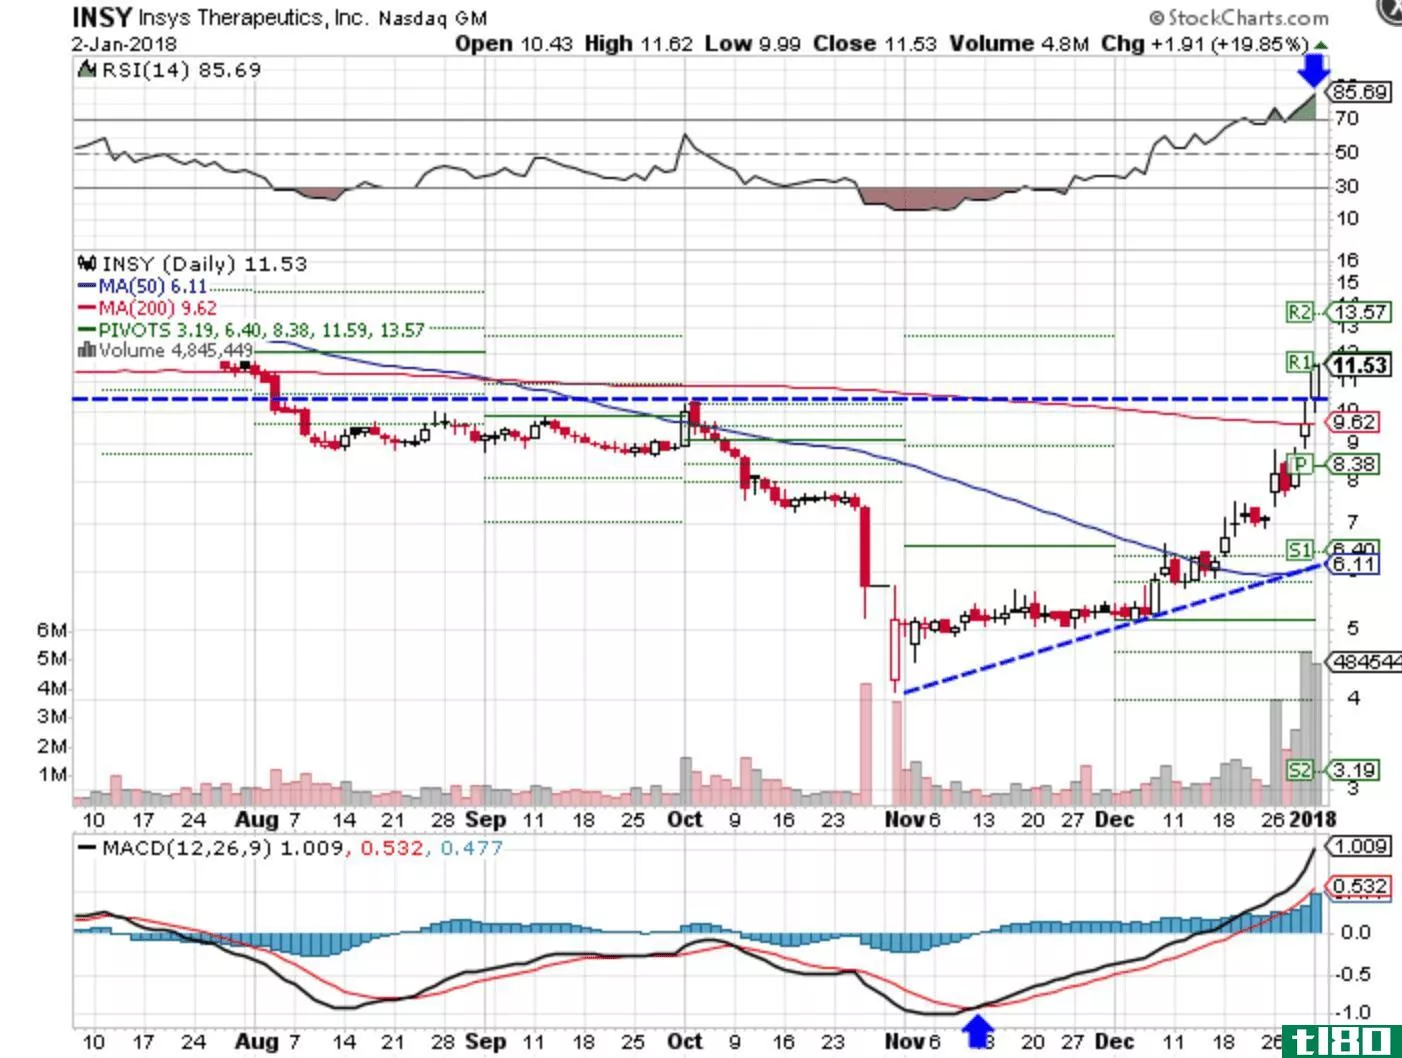 Technical chart showing the performance of Insys Therapeutics, Inc. (INSY)